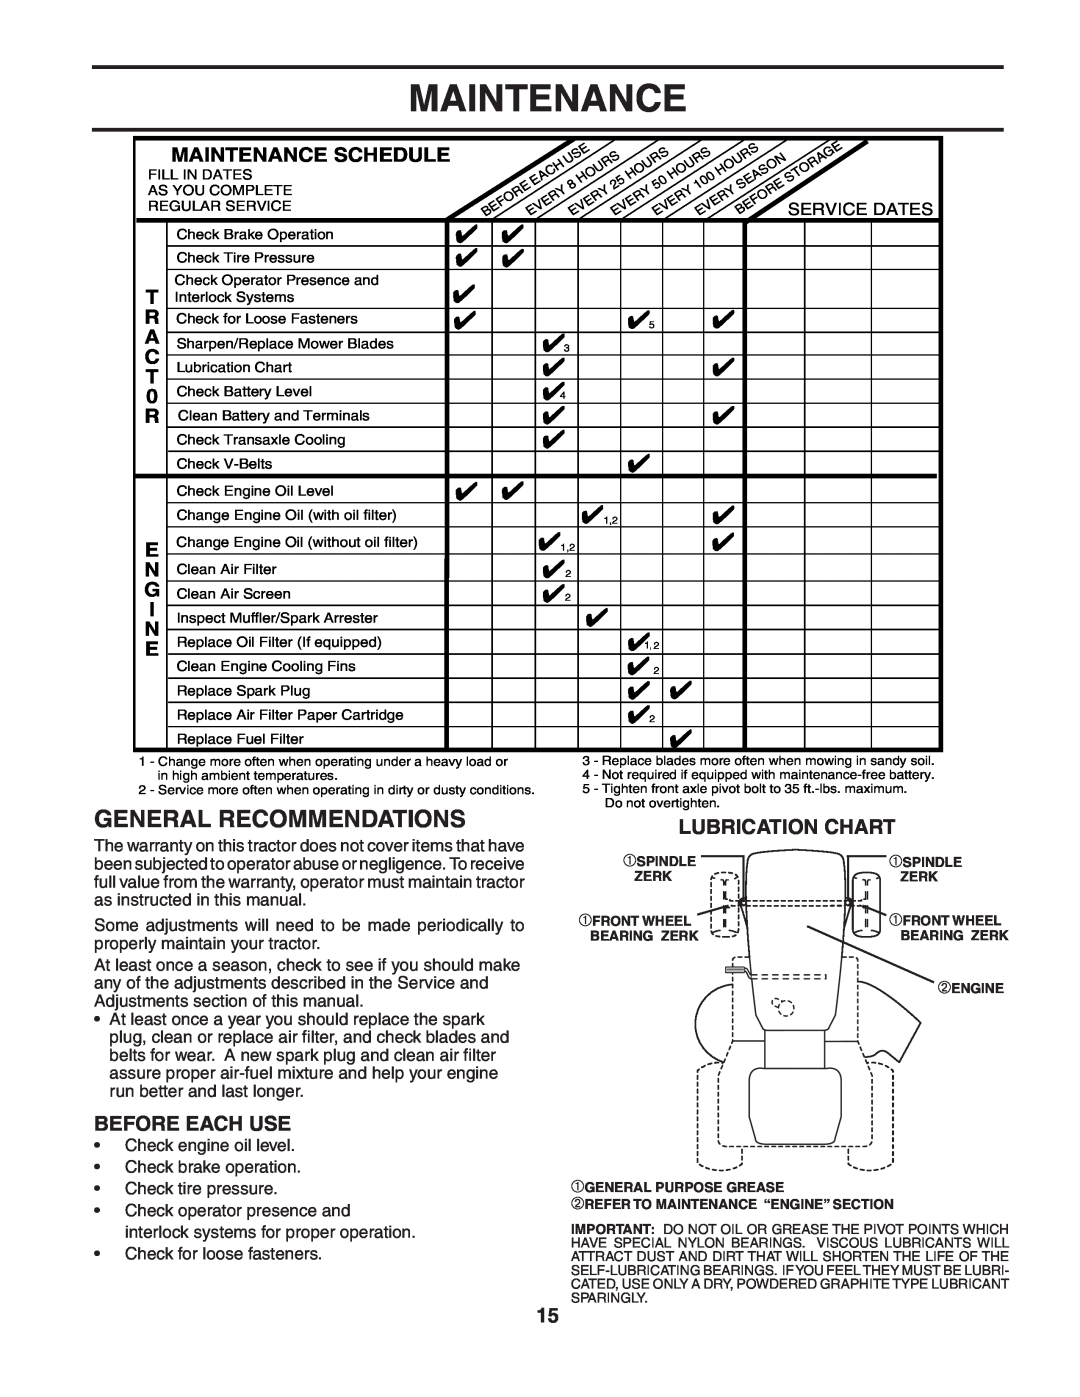 Poulan PD185H42STC owner manual General Recommendations, Lubrication Chart, Before Each Use, Maintenance Schedule 